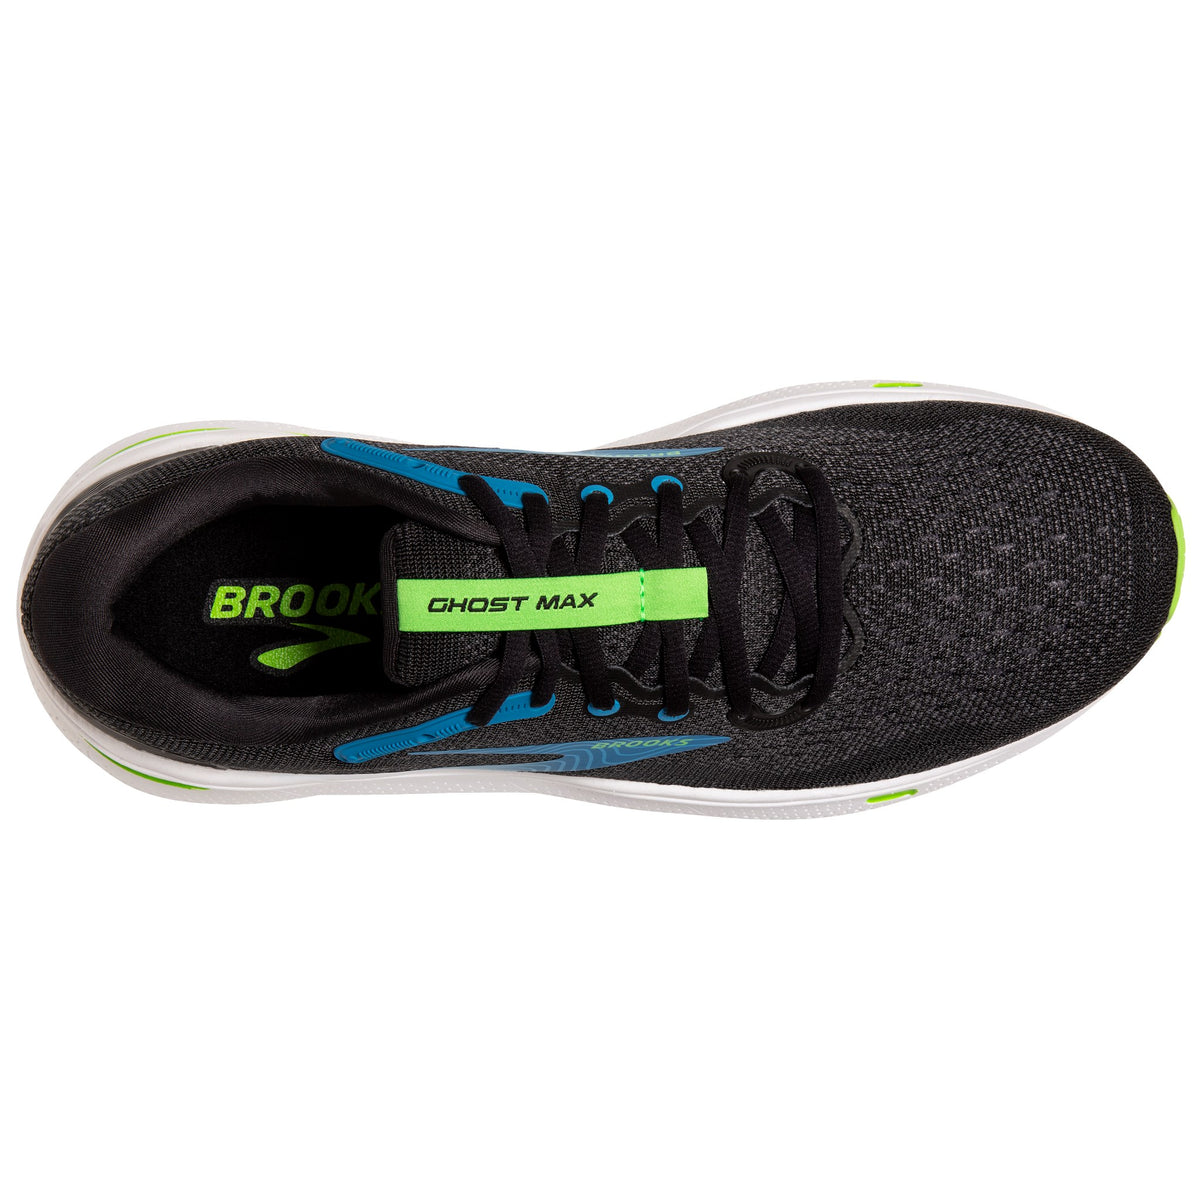 Top view of a Brooks Ghost Max Black/Atomic Blue running shoe with black upper, blue and green accents, and visible branding.